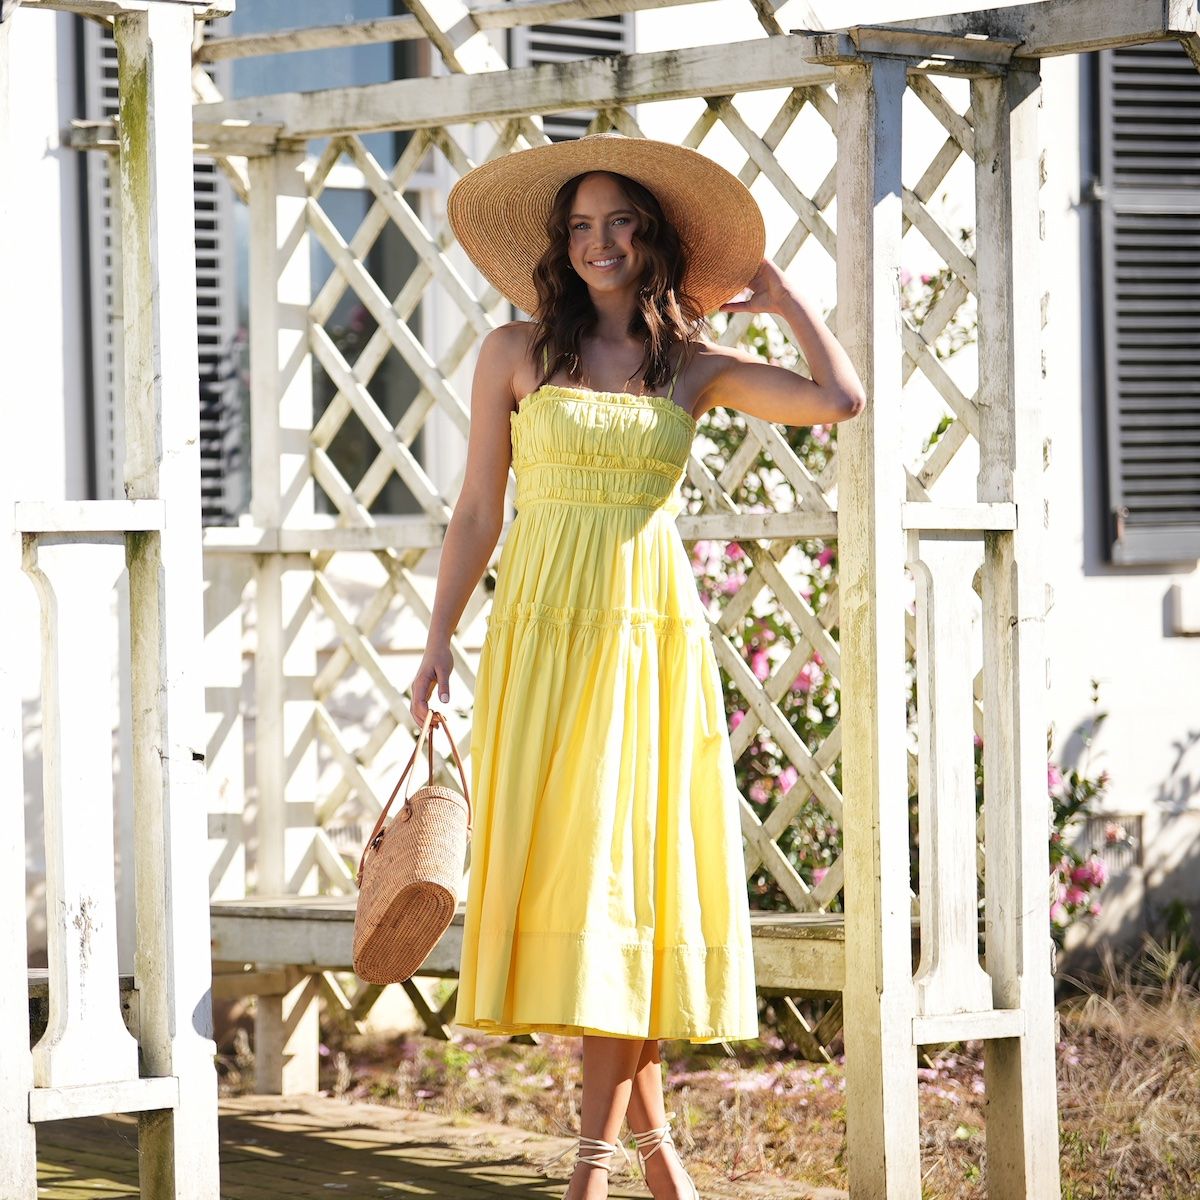 Model wearing yellow dress with straw hat